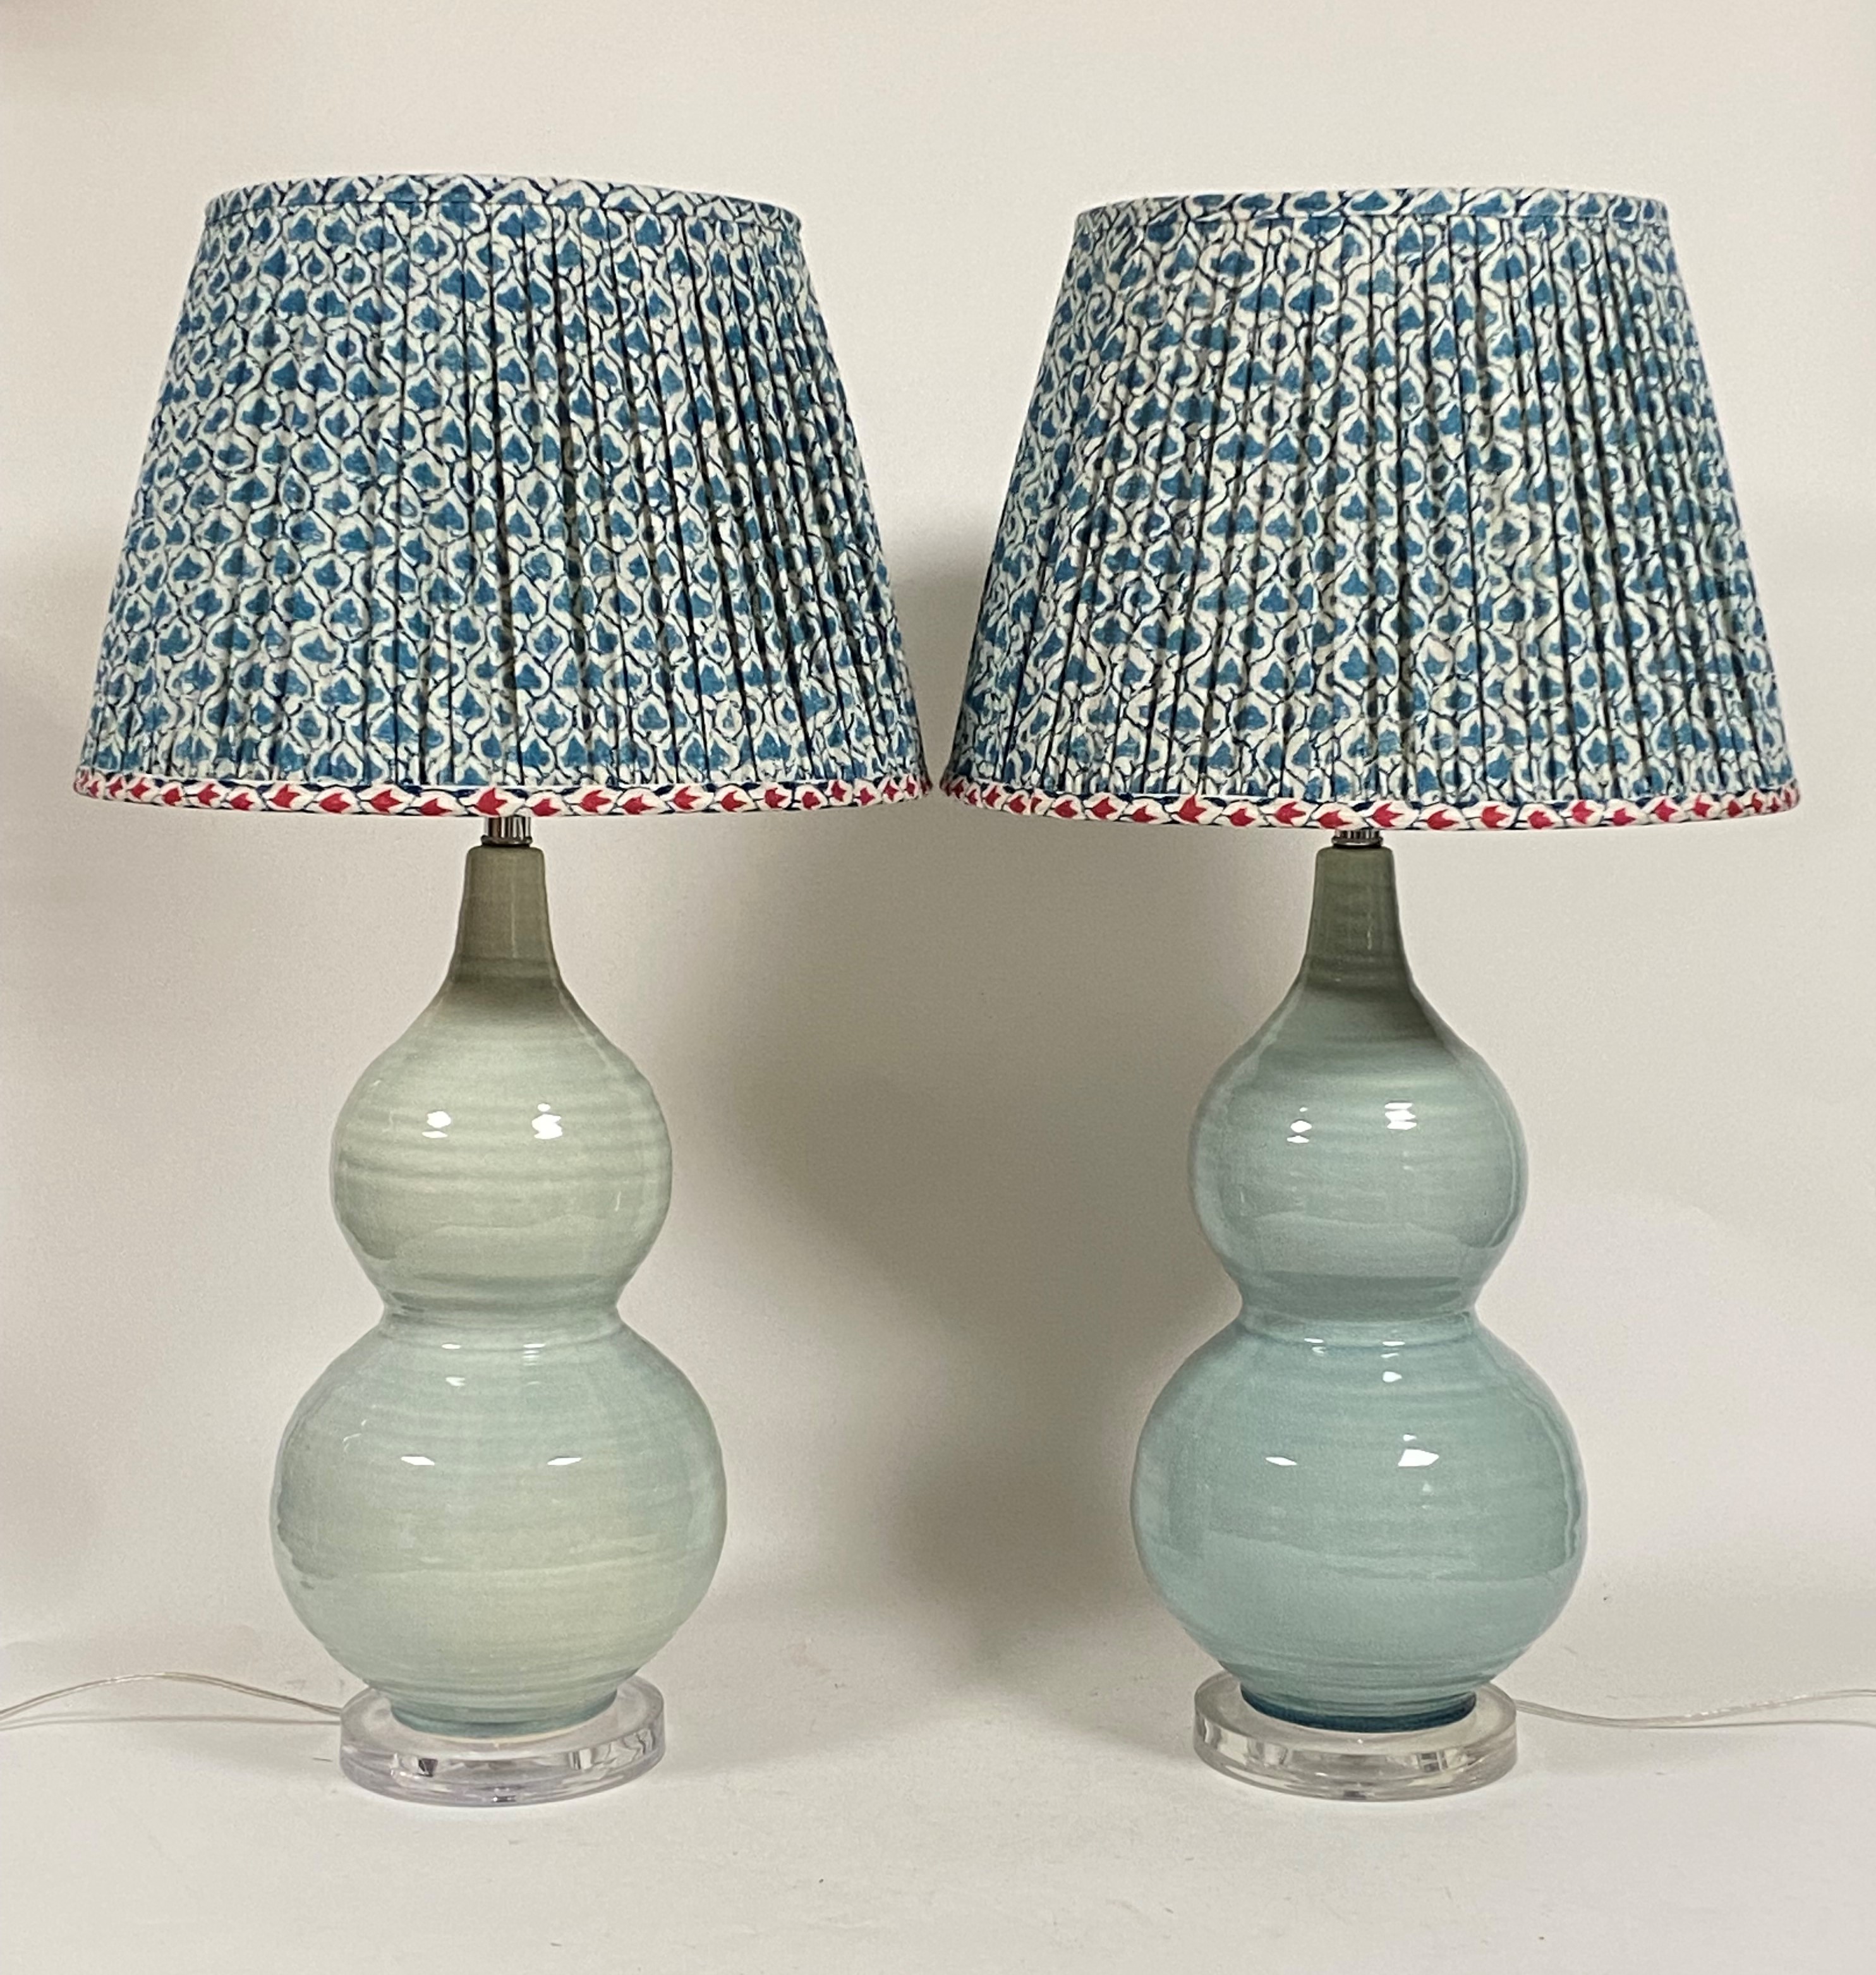 A pair of large OKA "Hulu" double gourd pottery table lamps, in a celadon crackle glaze, with blue